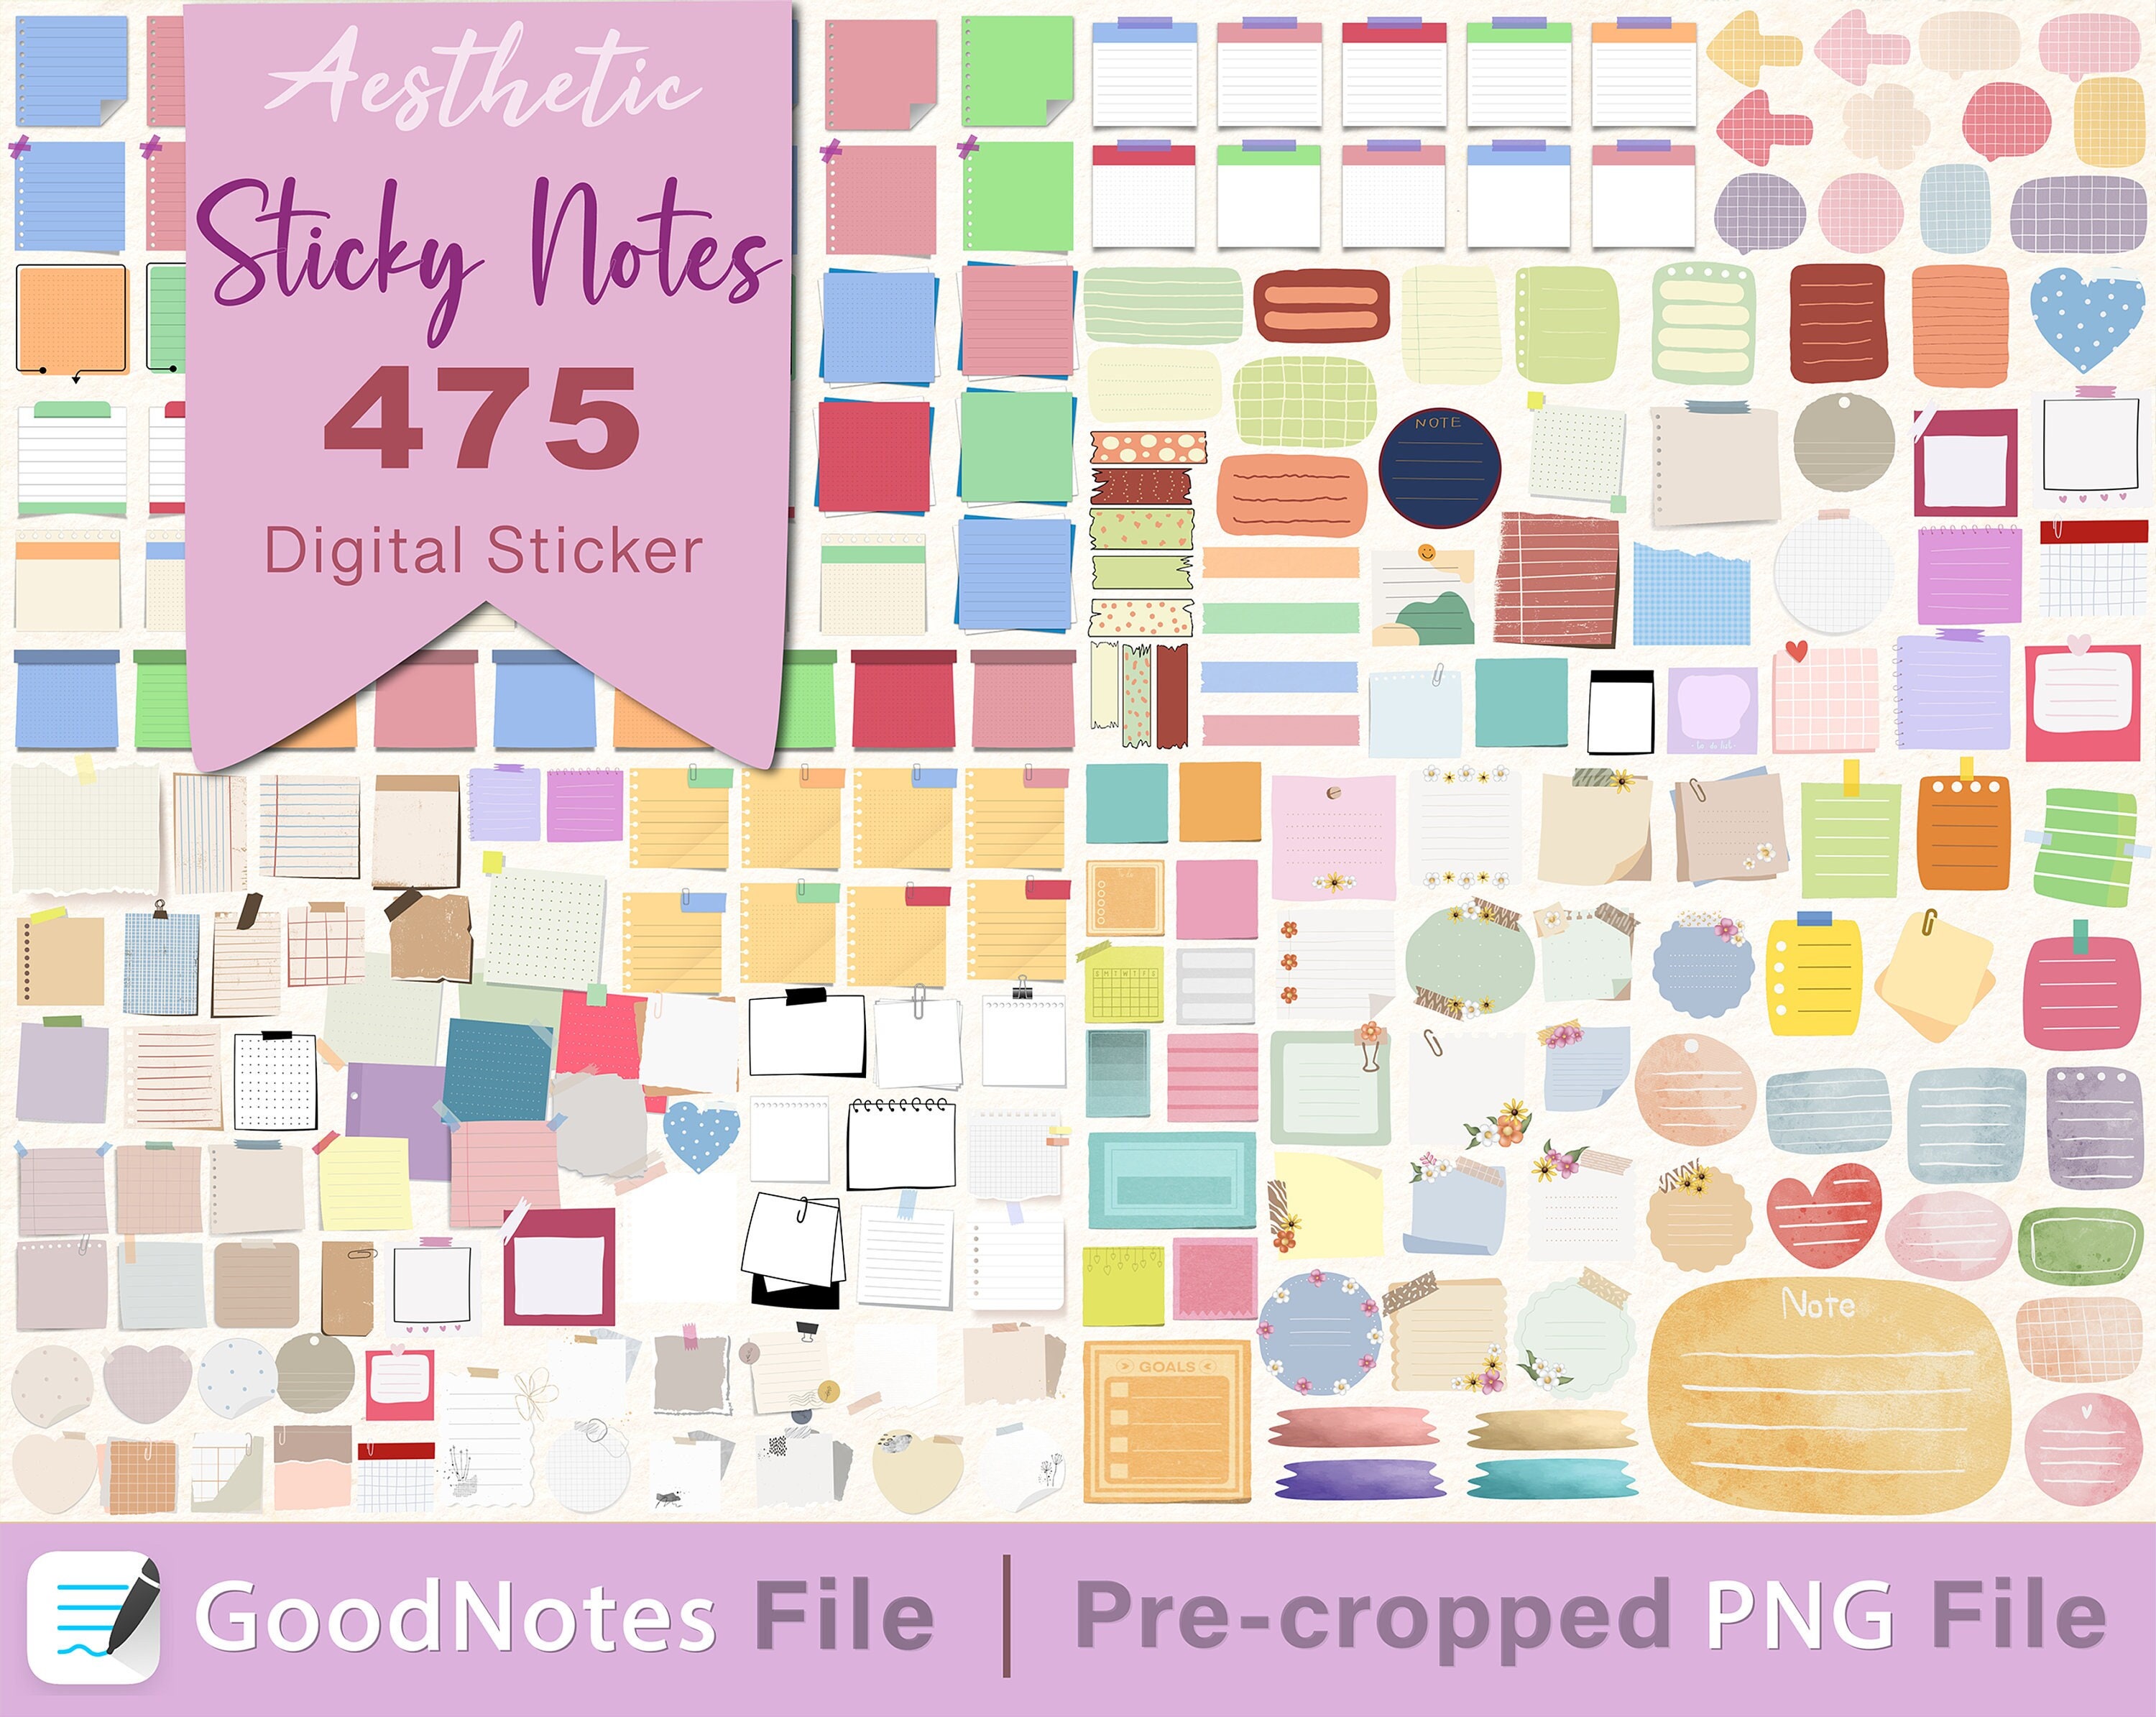 Hand Drawn Bullet Journal Clip Art. Teacher Panner Illustrations. Digital  Planner Stickers. Doodle Sticky Notes, Washi Tape, Post-it Clipart -   Finland